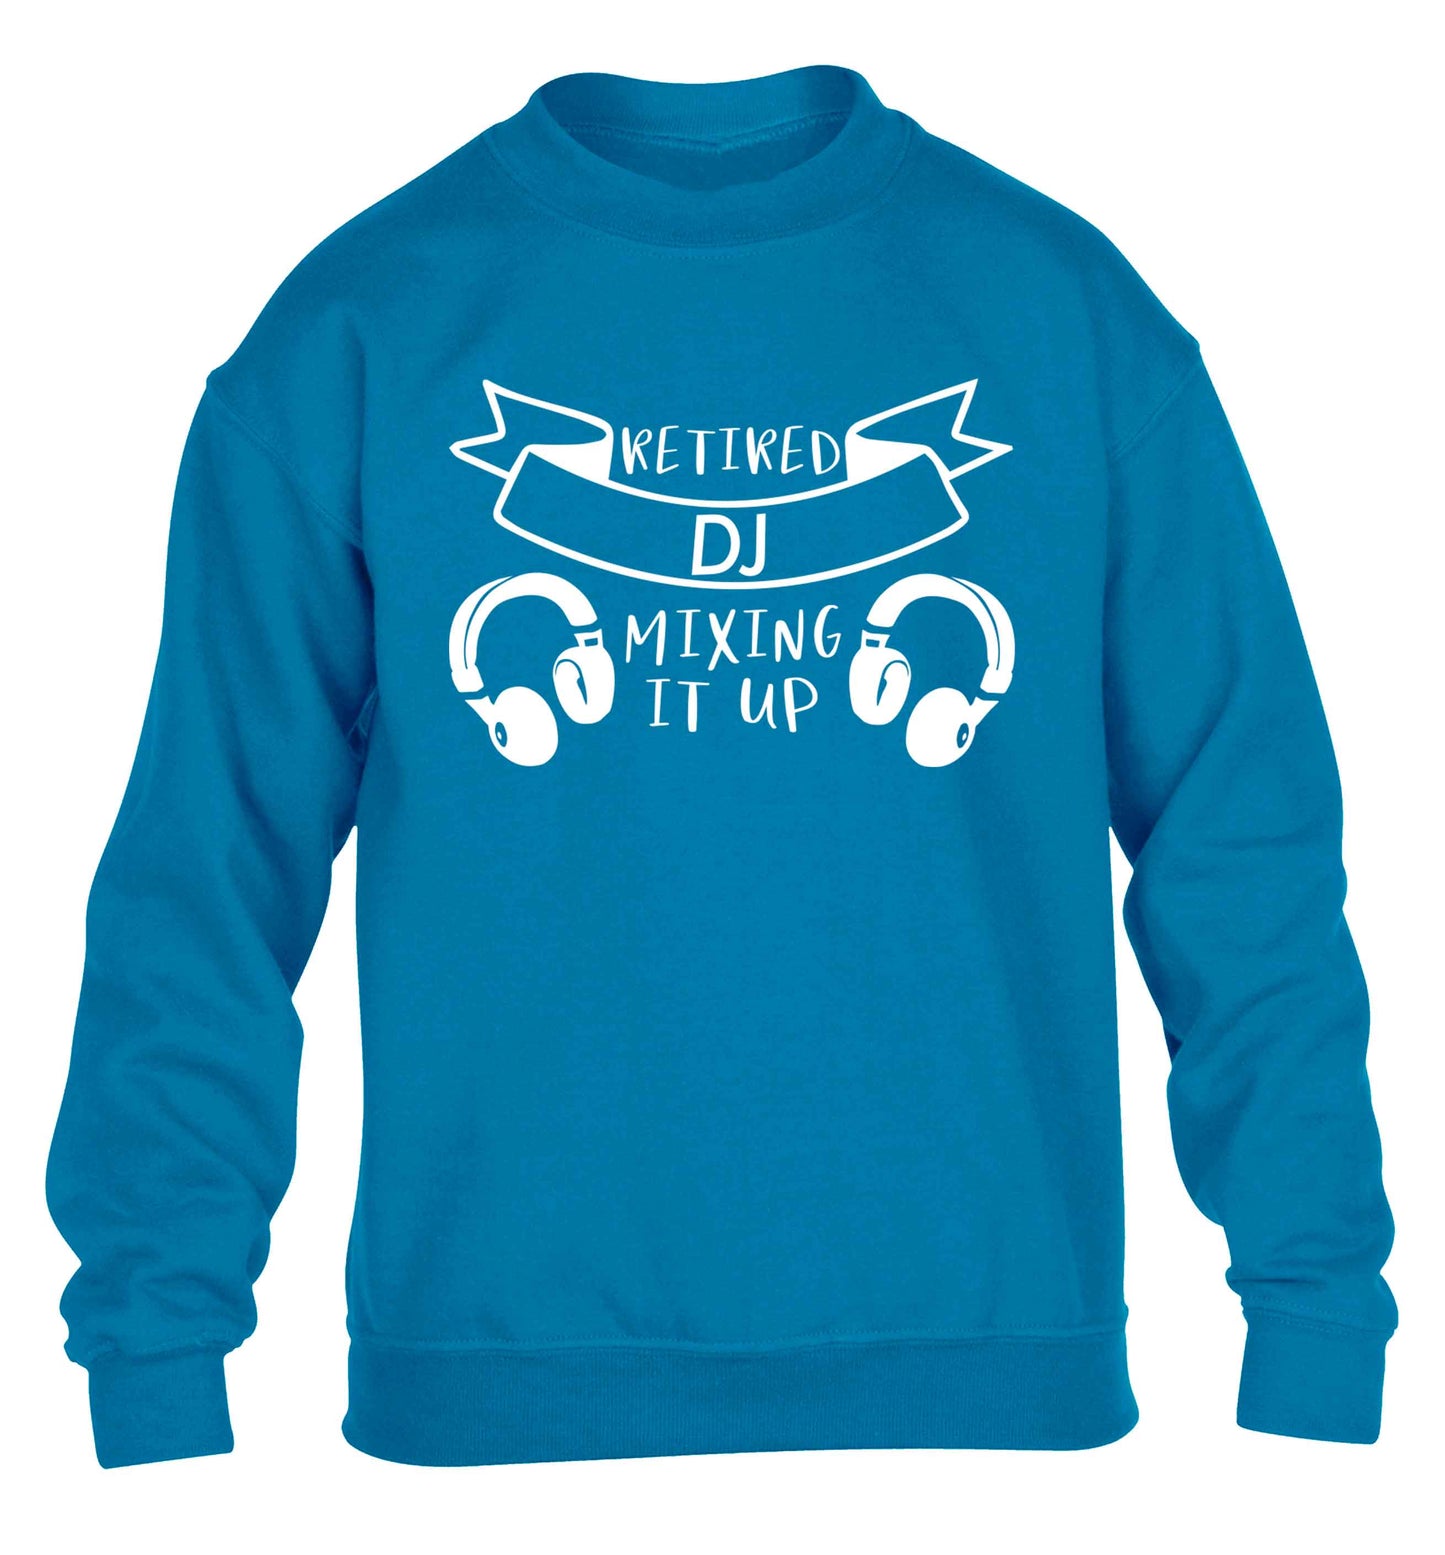 Retired DJ mixing it up children's blue sweater 12-13 Years